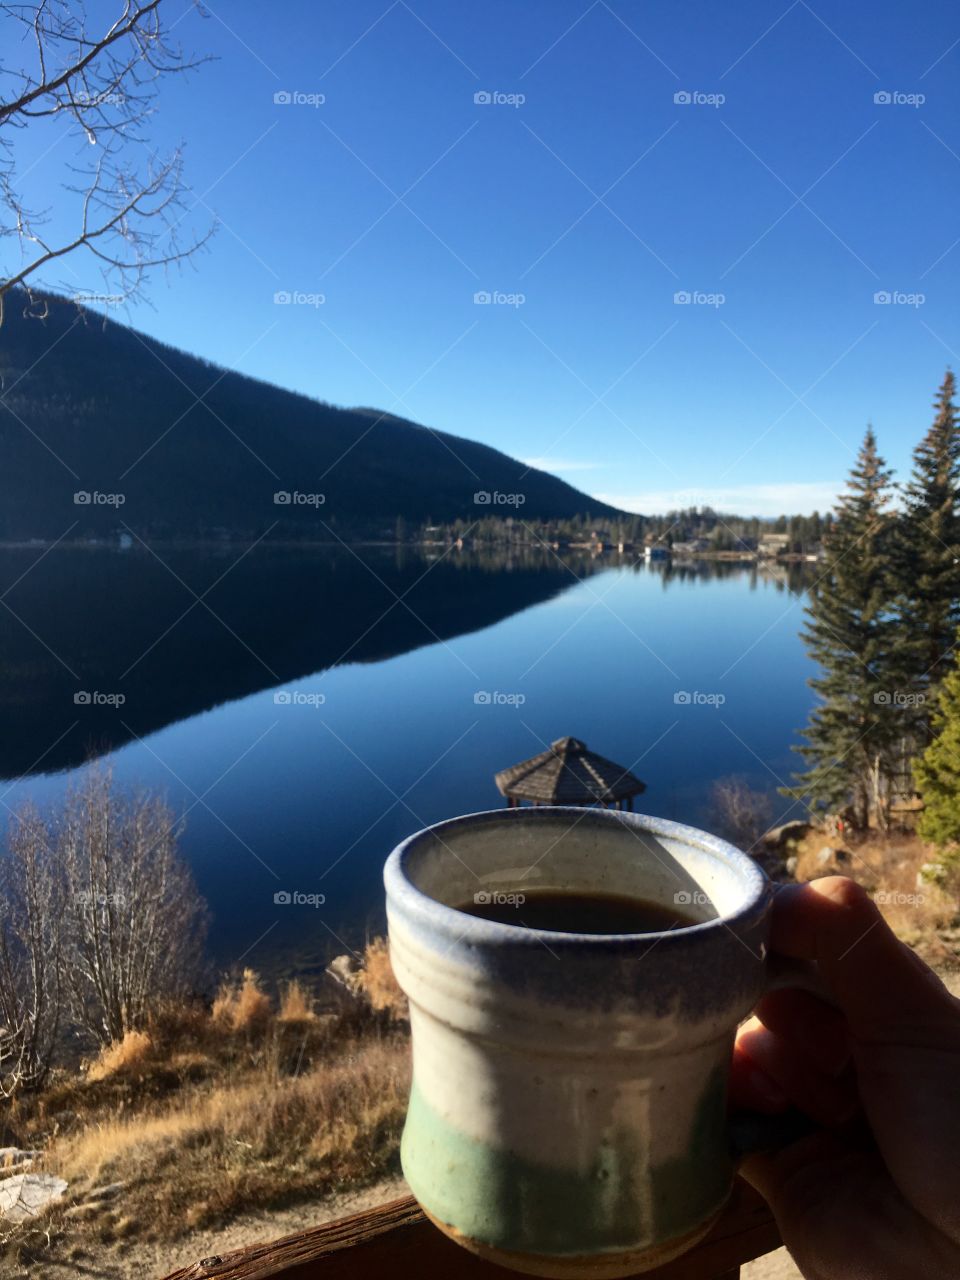 Morning coffee over the lake 